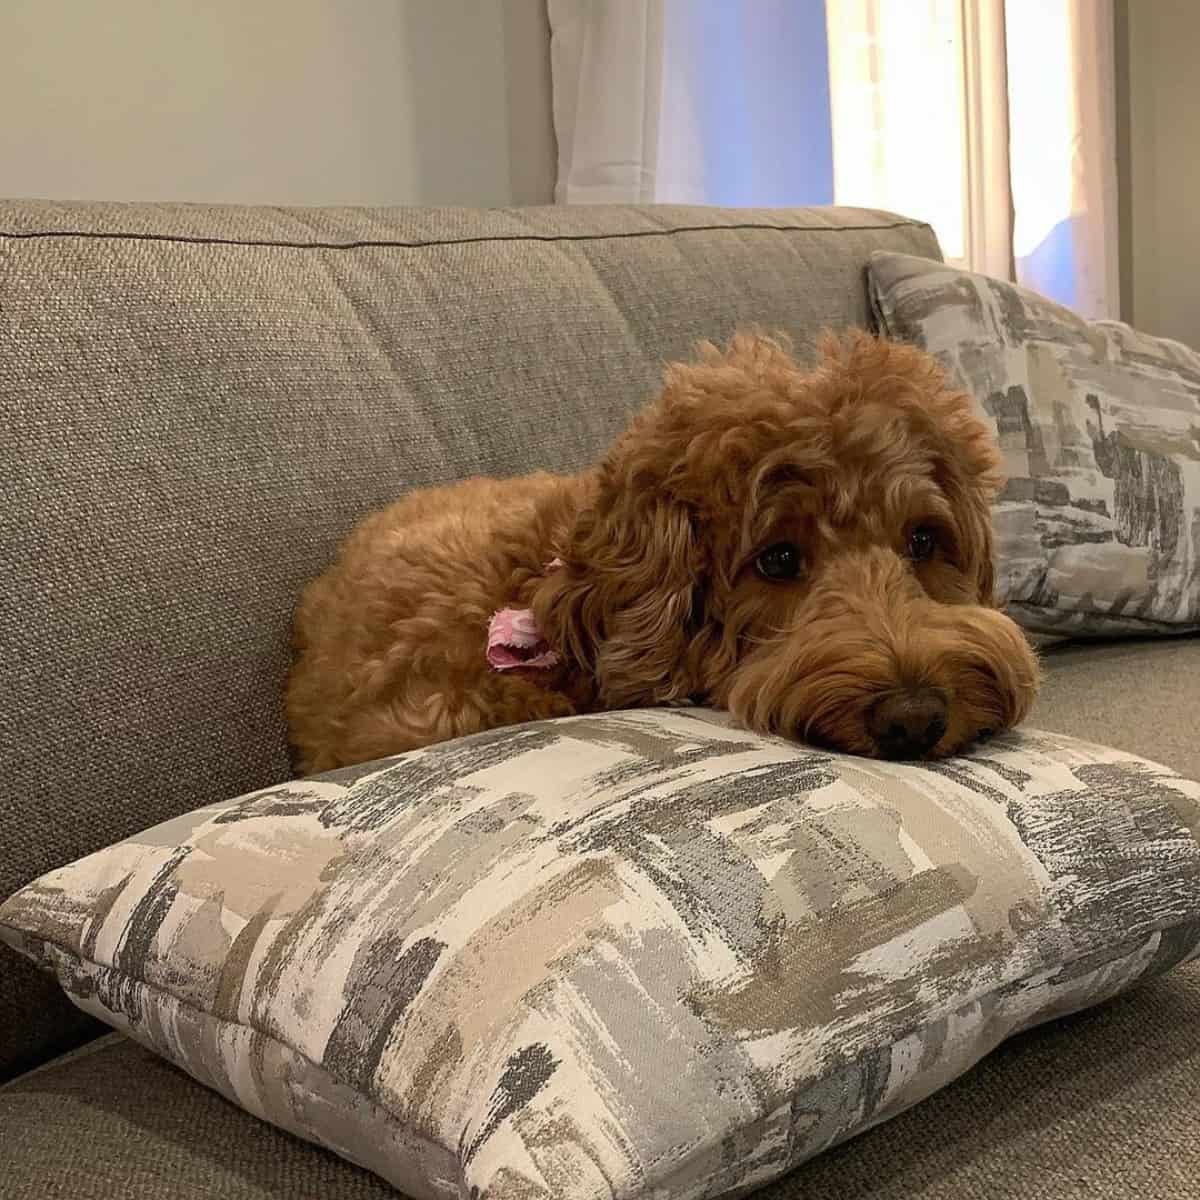 looks scared Goldendoodle on pillow